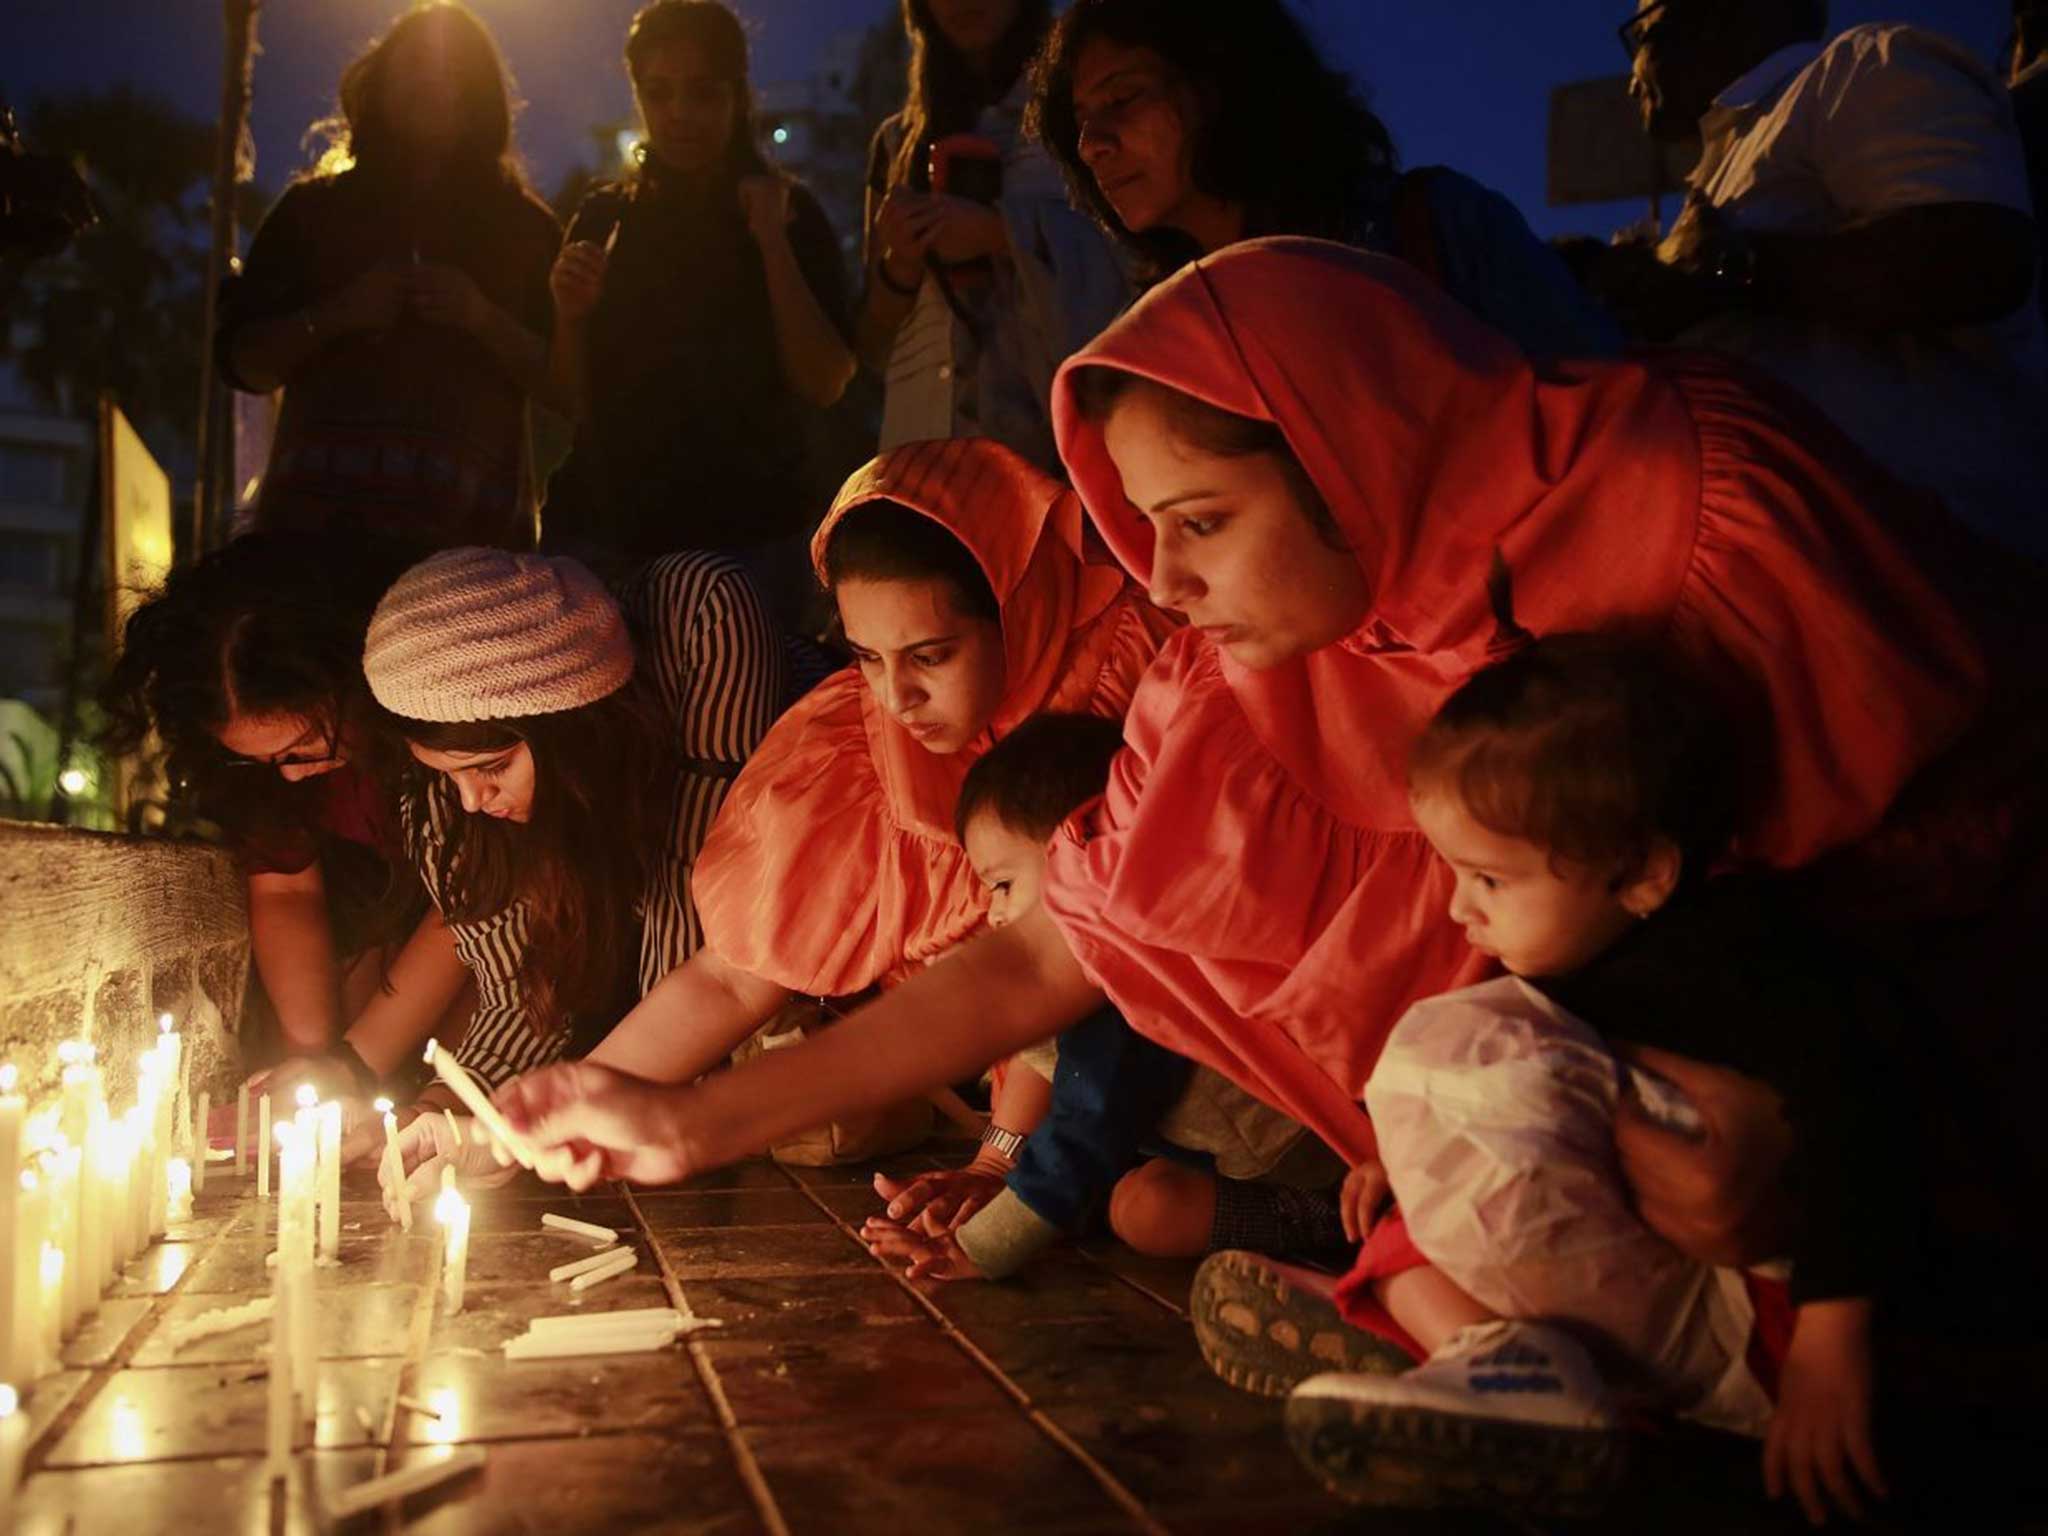 Honouring the latest victims of terror in Pakistan